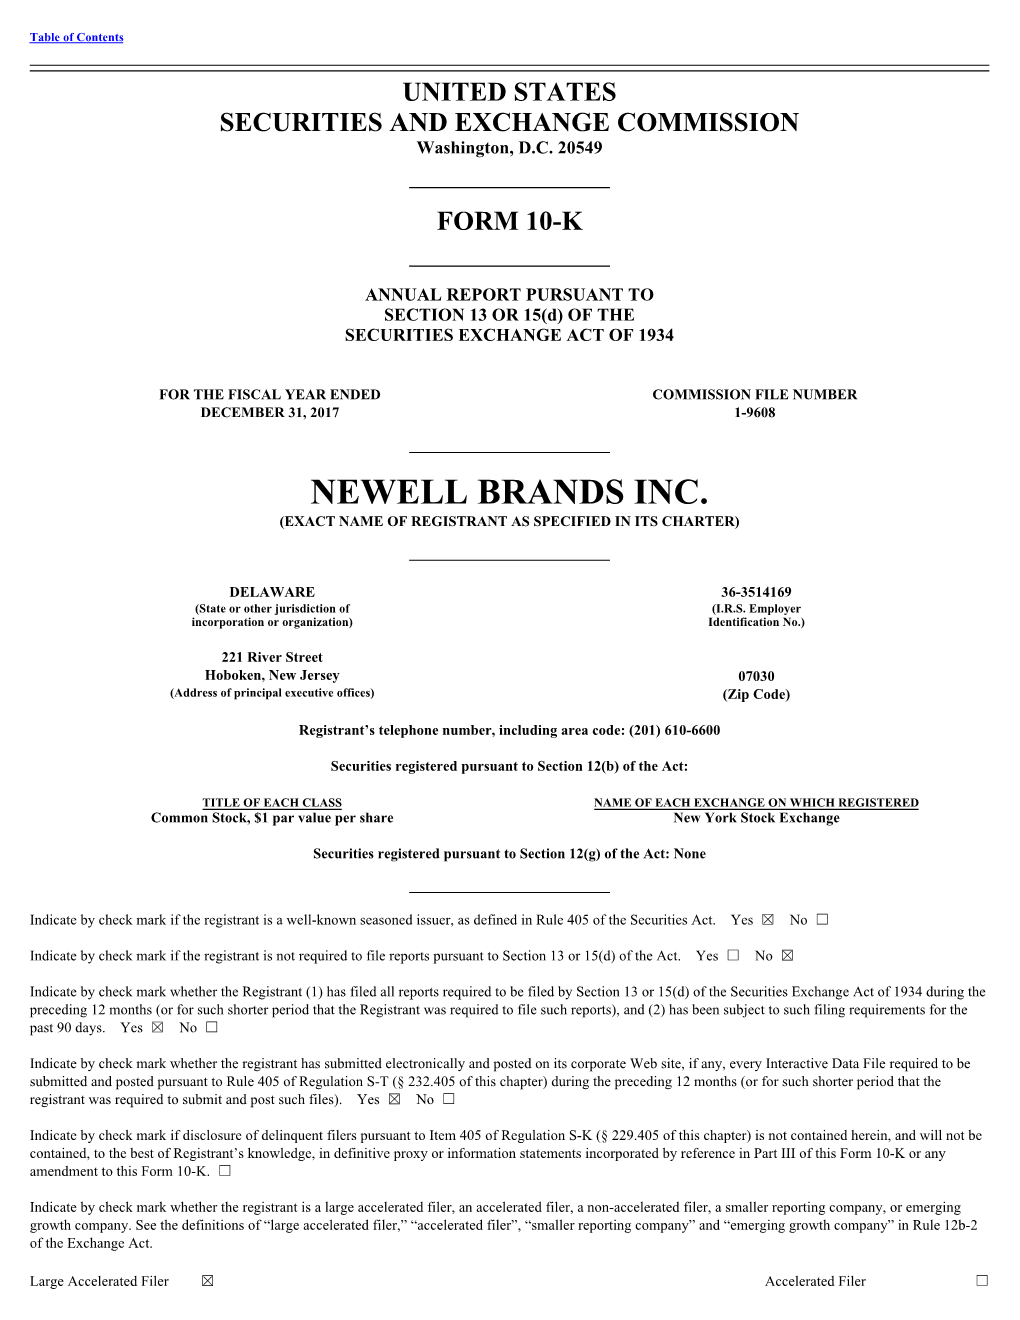 Newell Brands Inc. (Exact Name of Registrant As Specified in Its Charter)